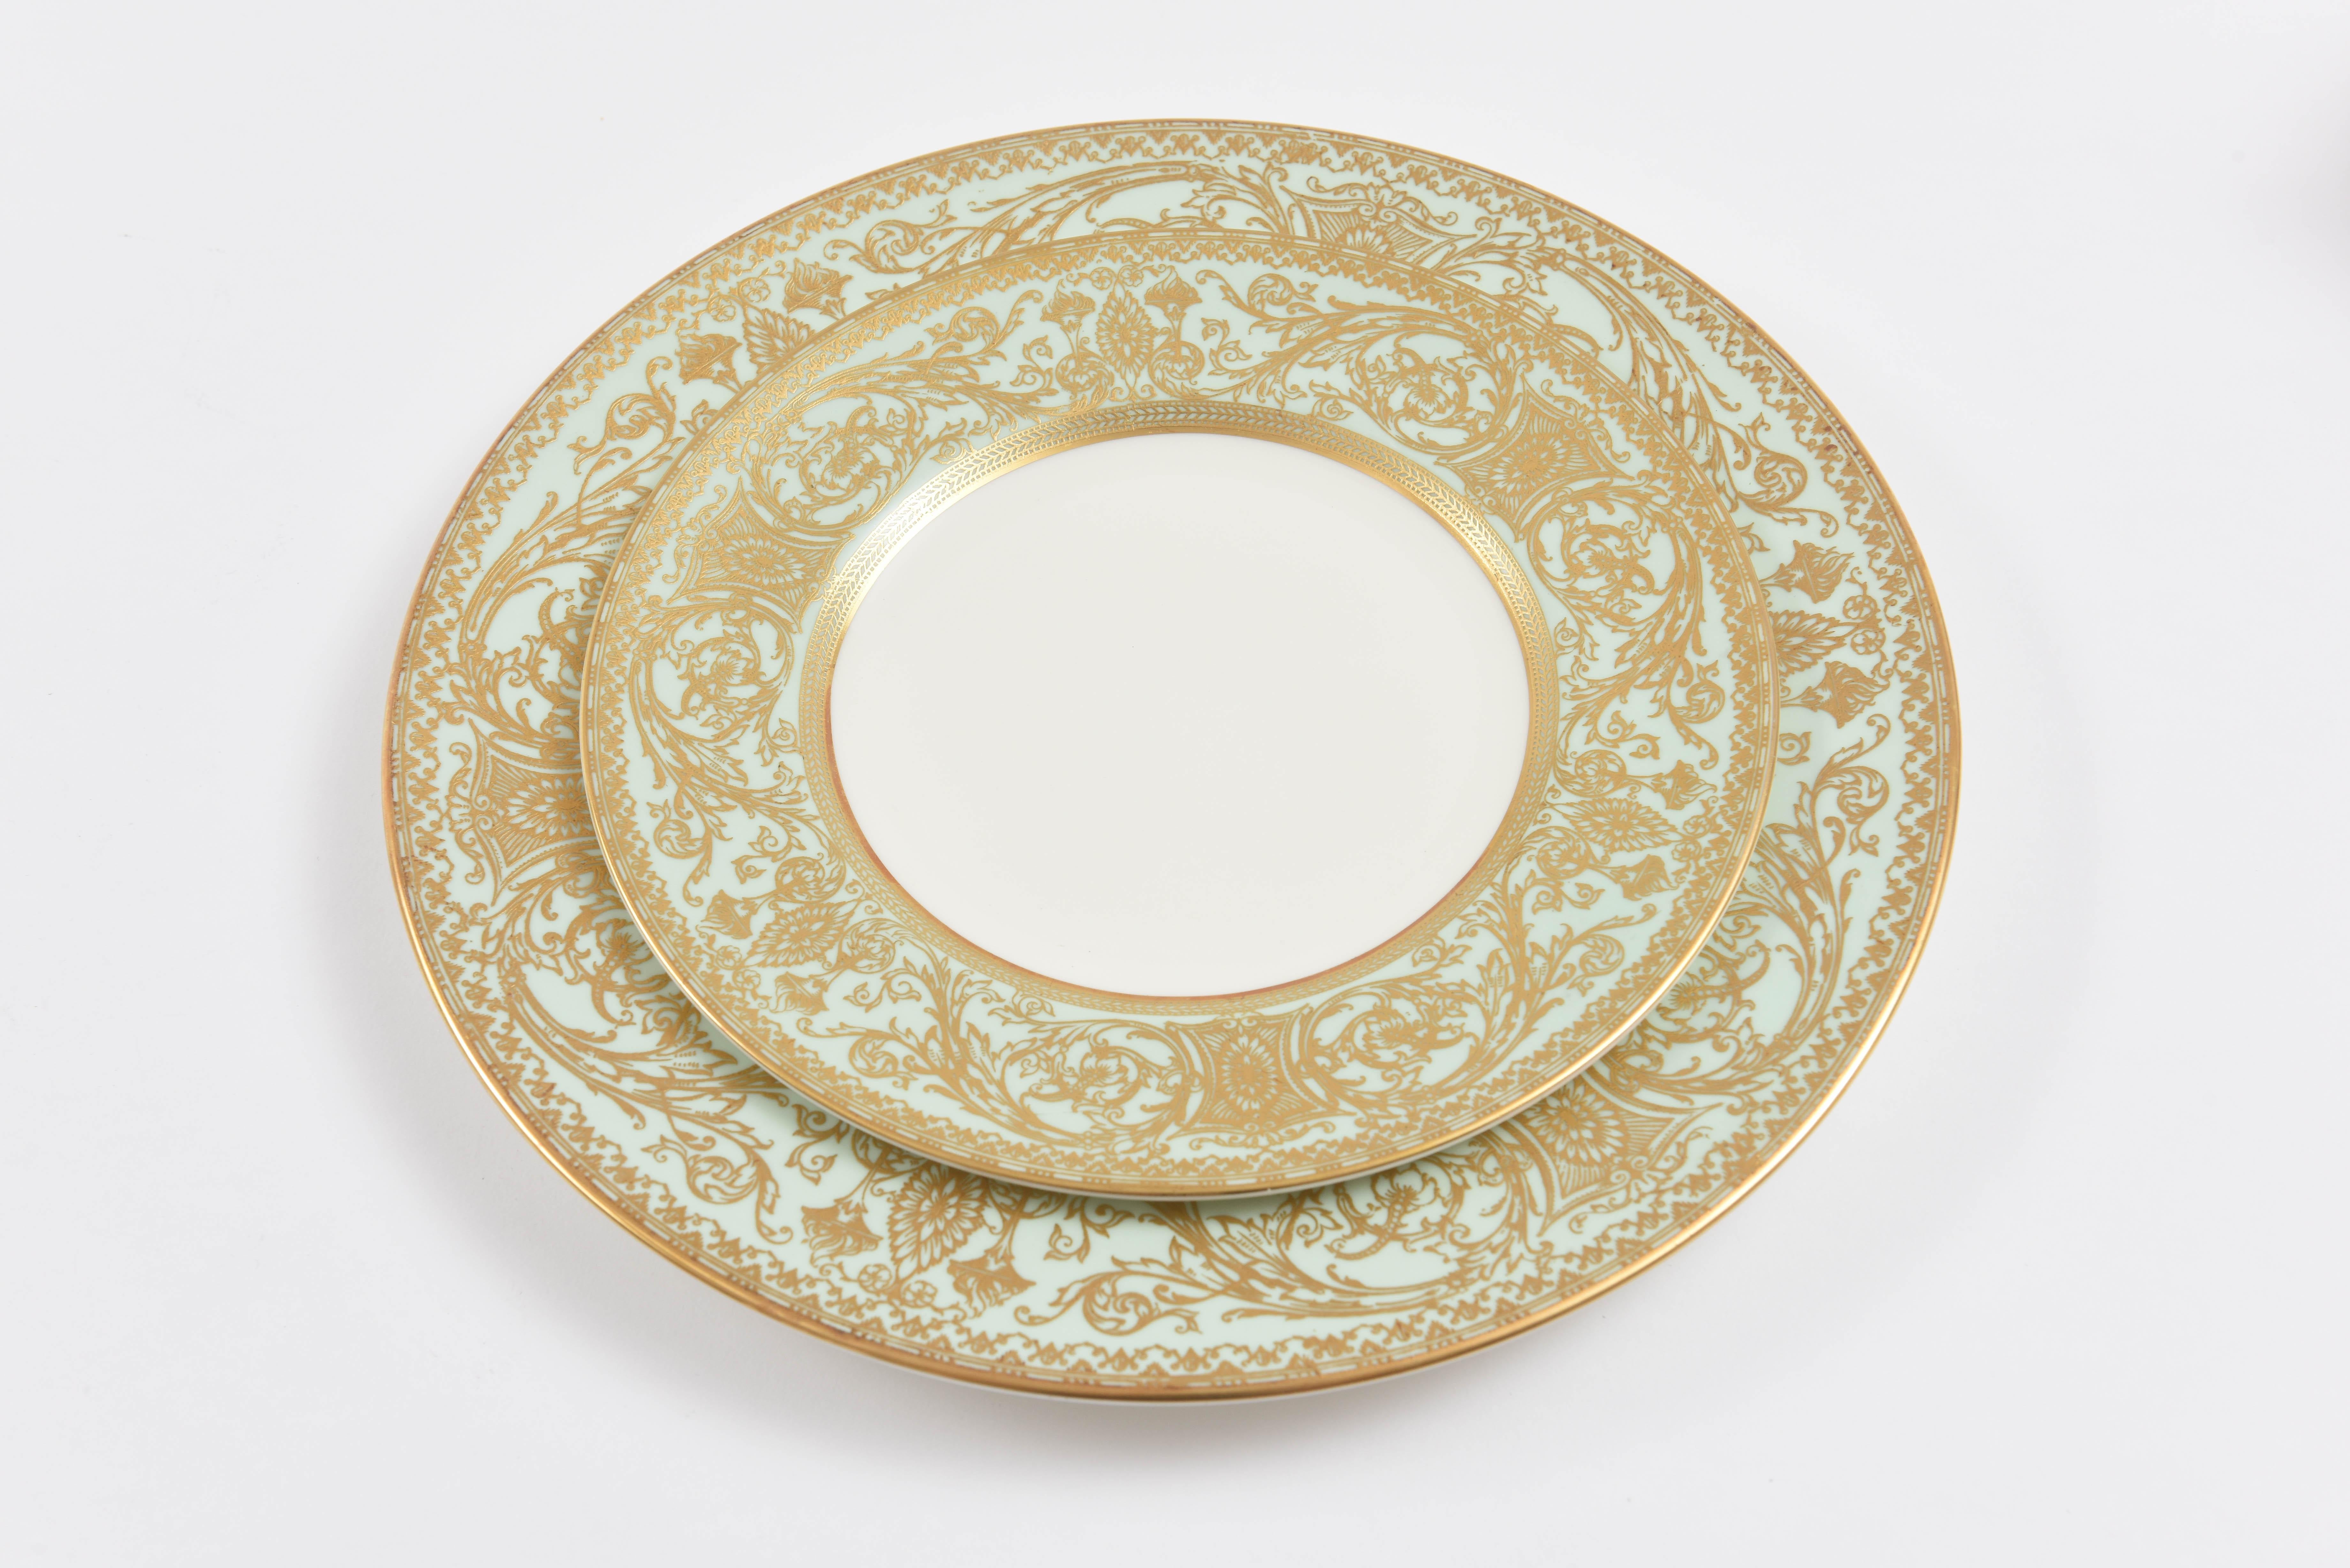 Mid-20th Century Extensive English Porcelain Service for 12, Lovely Sage Mint Green Gilded 106 Pc